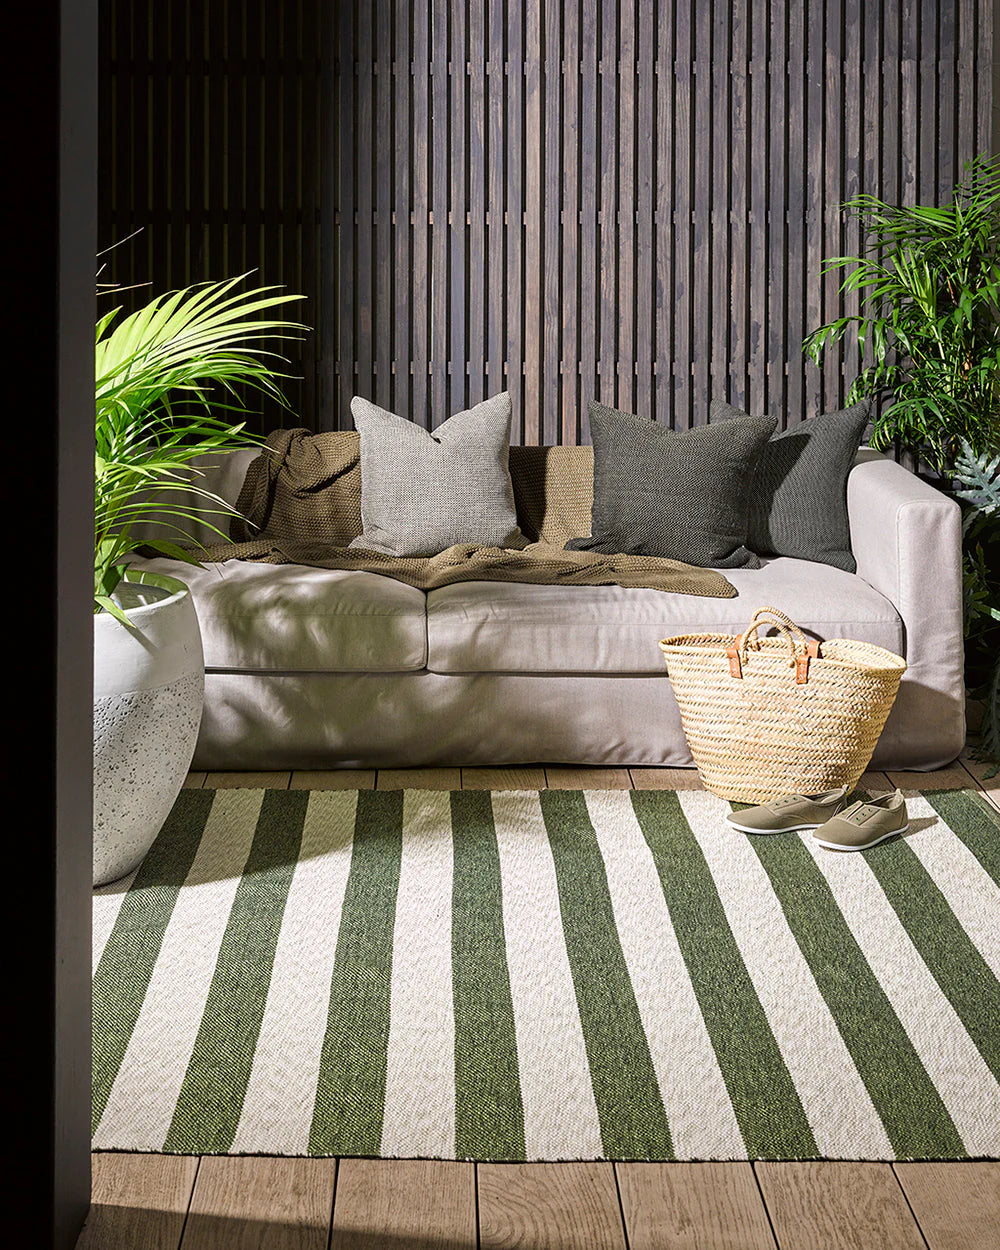 Summit Peak Reversible Outdoor Rug from Baya Furtex Stockist Make Your House A Home, Furniture Store Bendigo. Free Australia Wide Delivery.